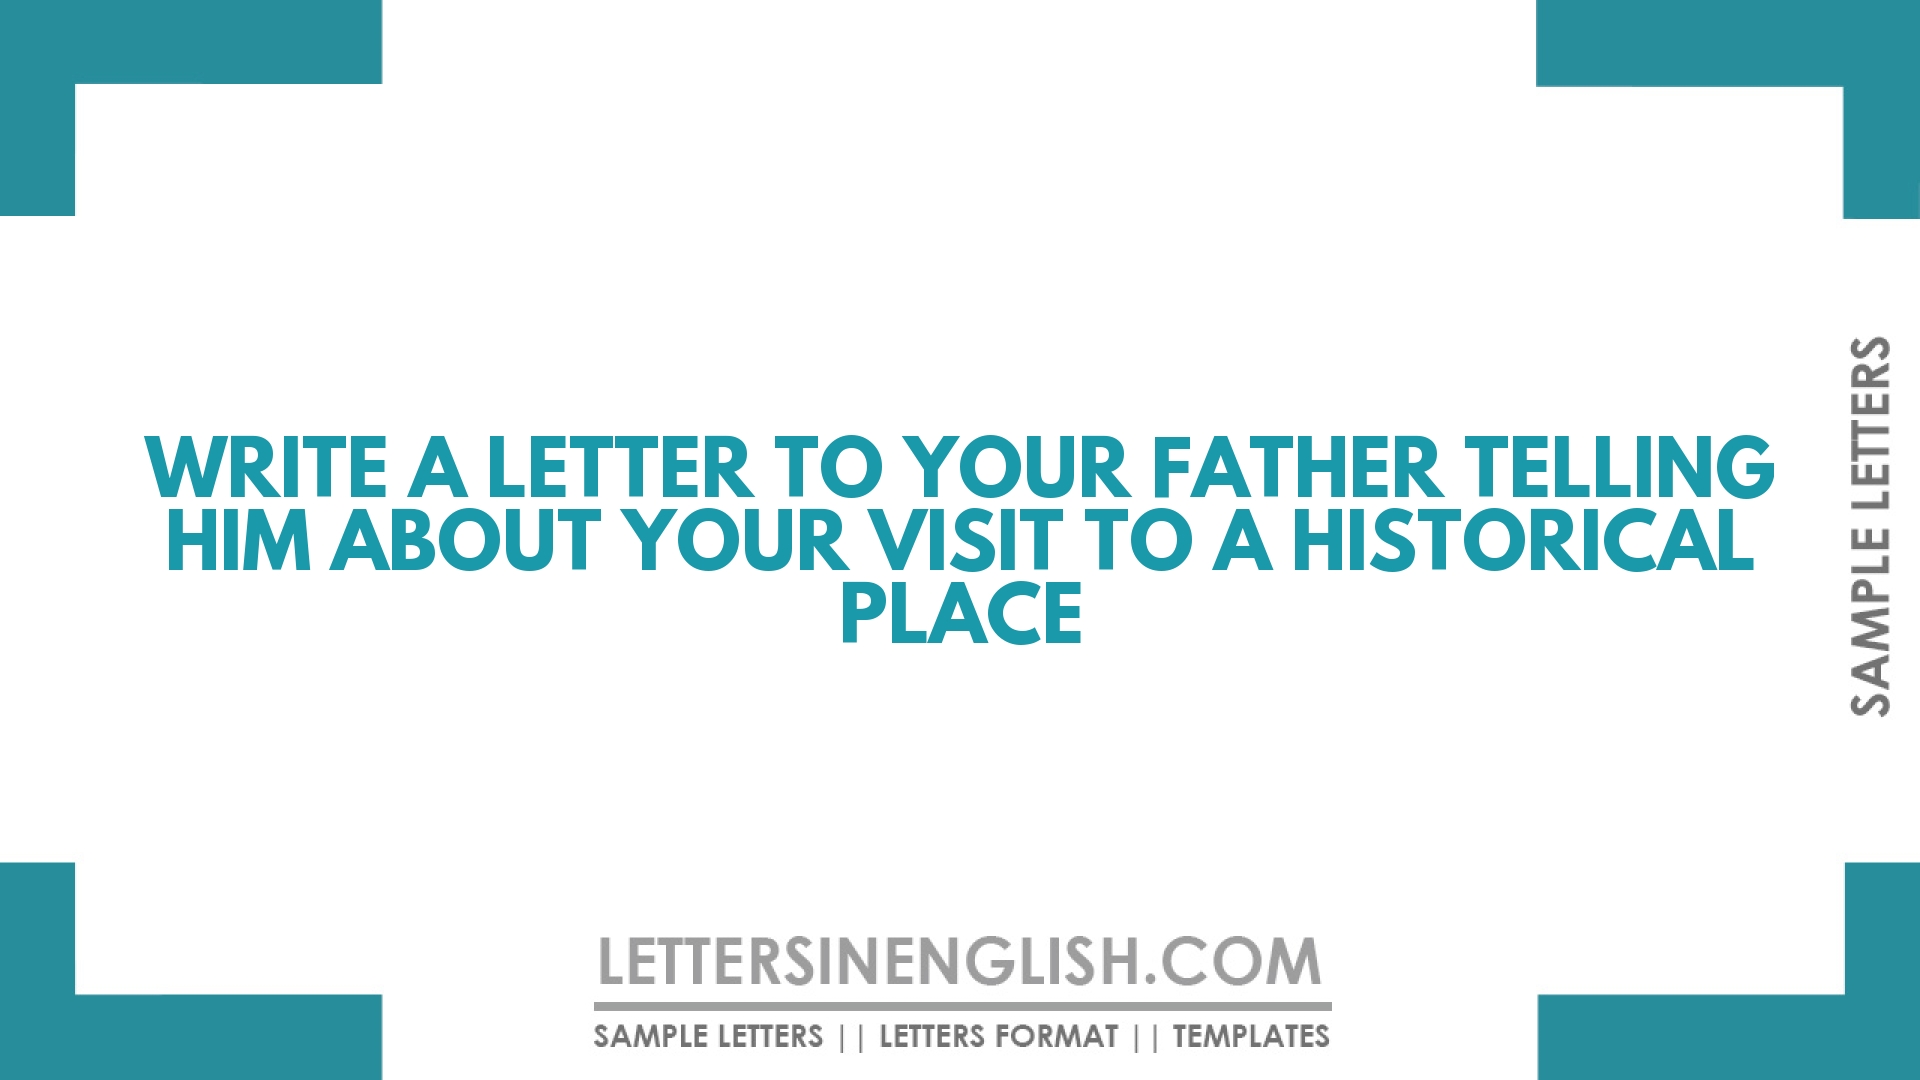 Write a Letter to Your Father Telling Him about Your Visit to a Historical Place